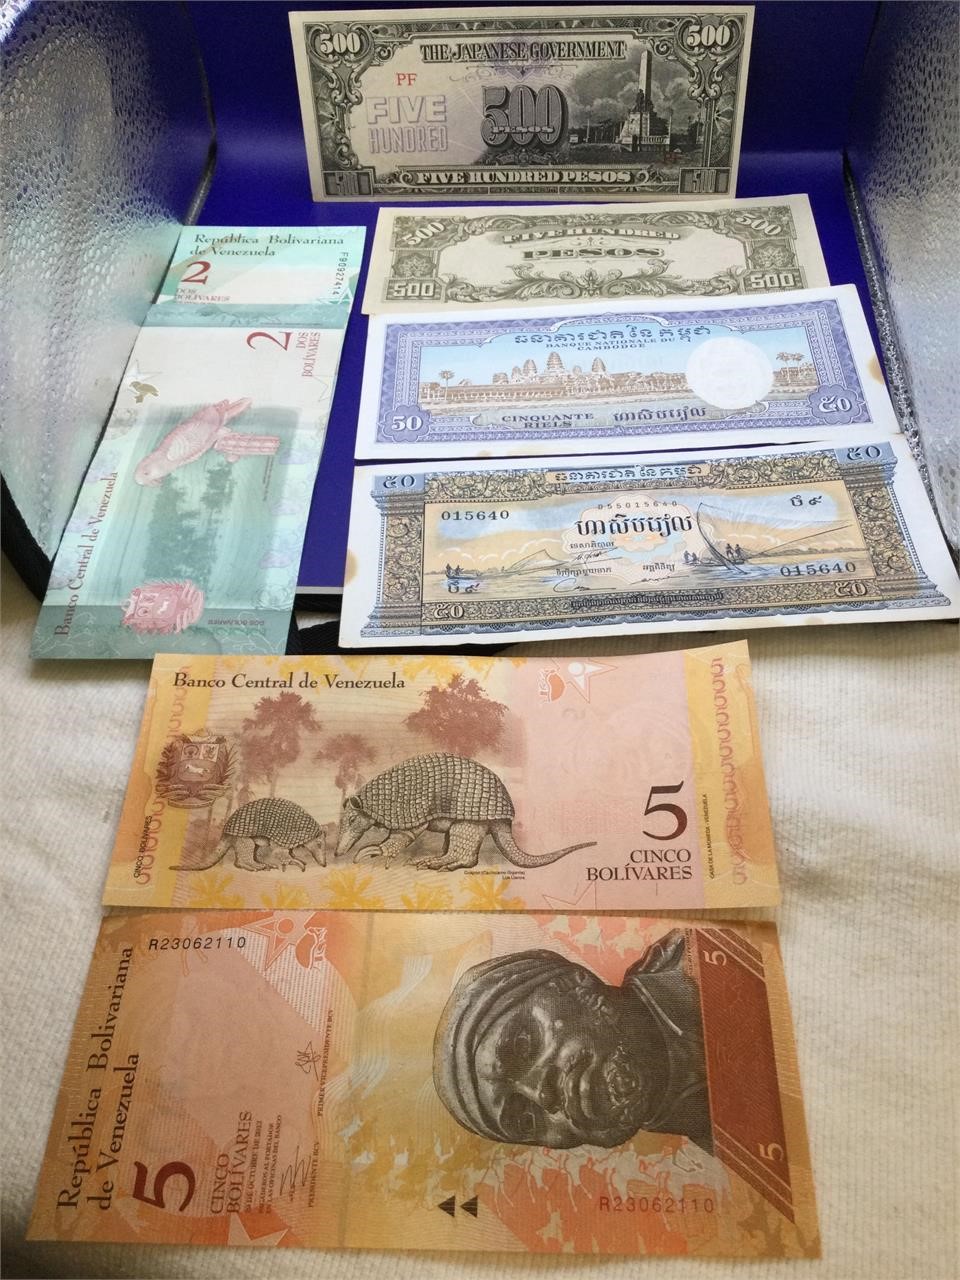 Rare: WW 2 Japanese 500 Pesos Bills and others